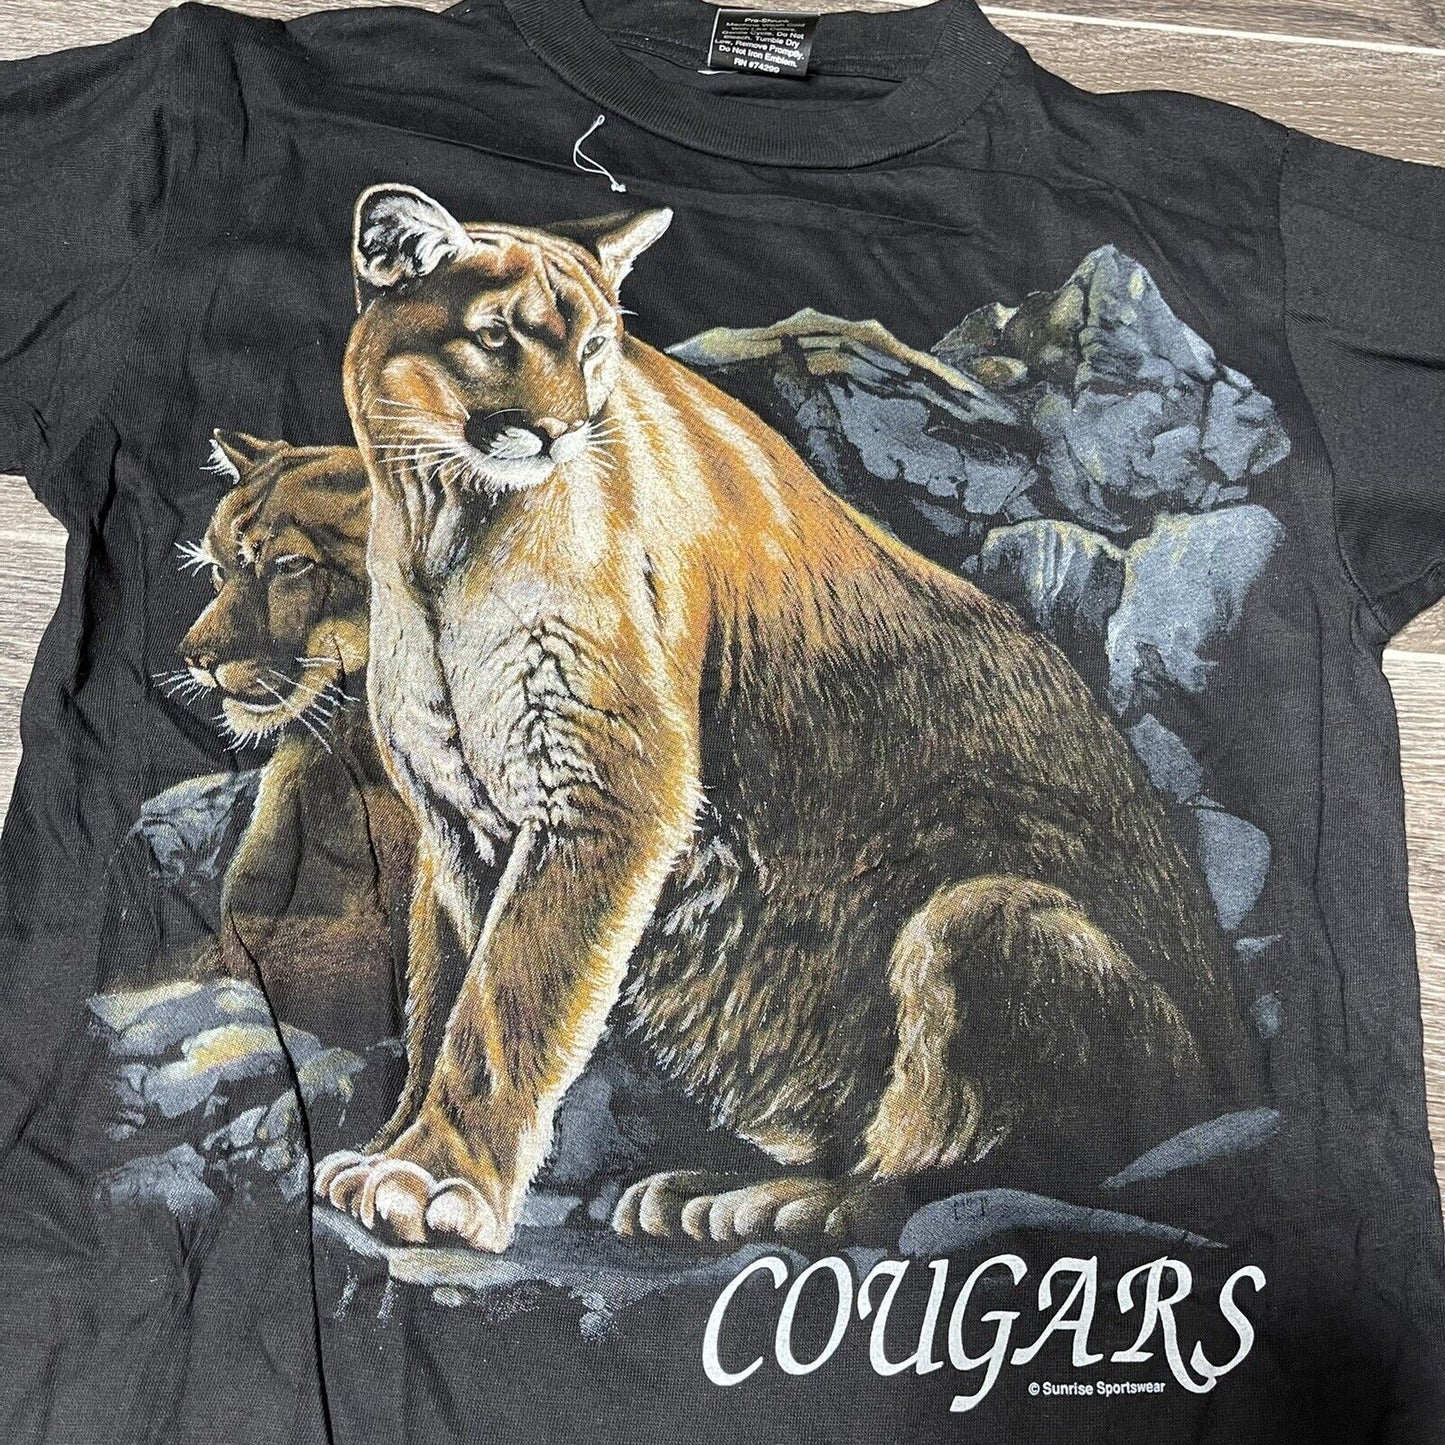 vintage american  thunder cougars shirt size small “youth xl”